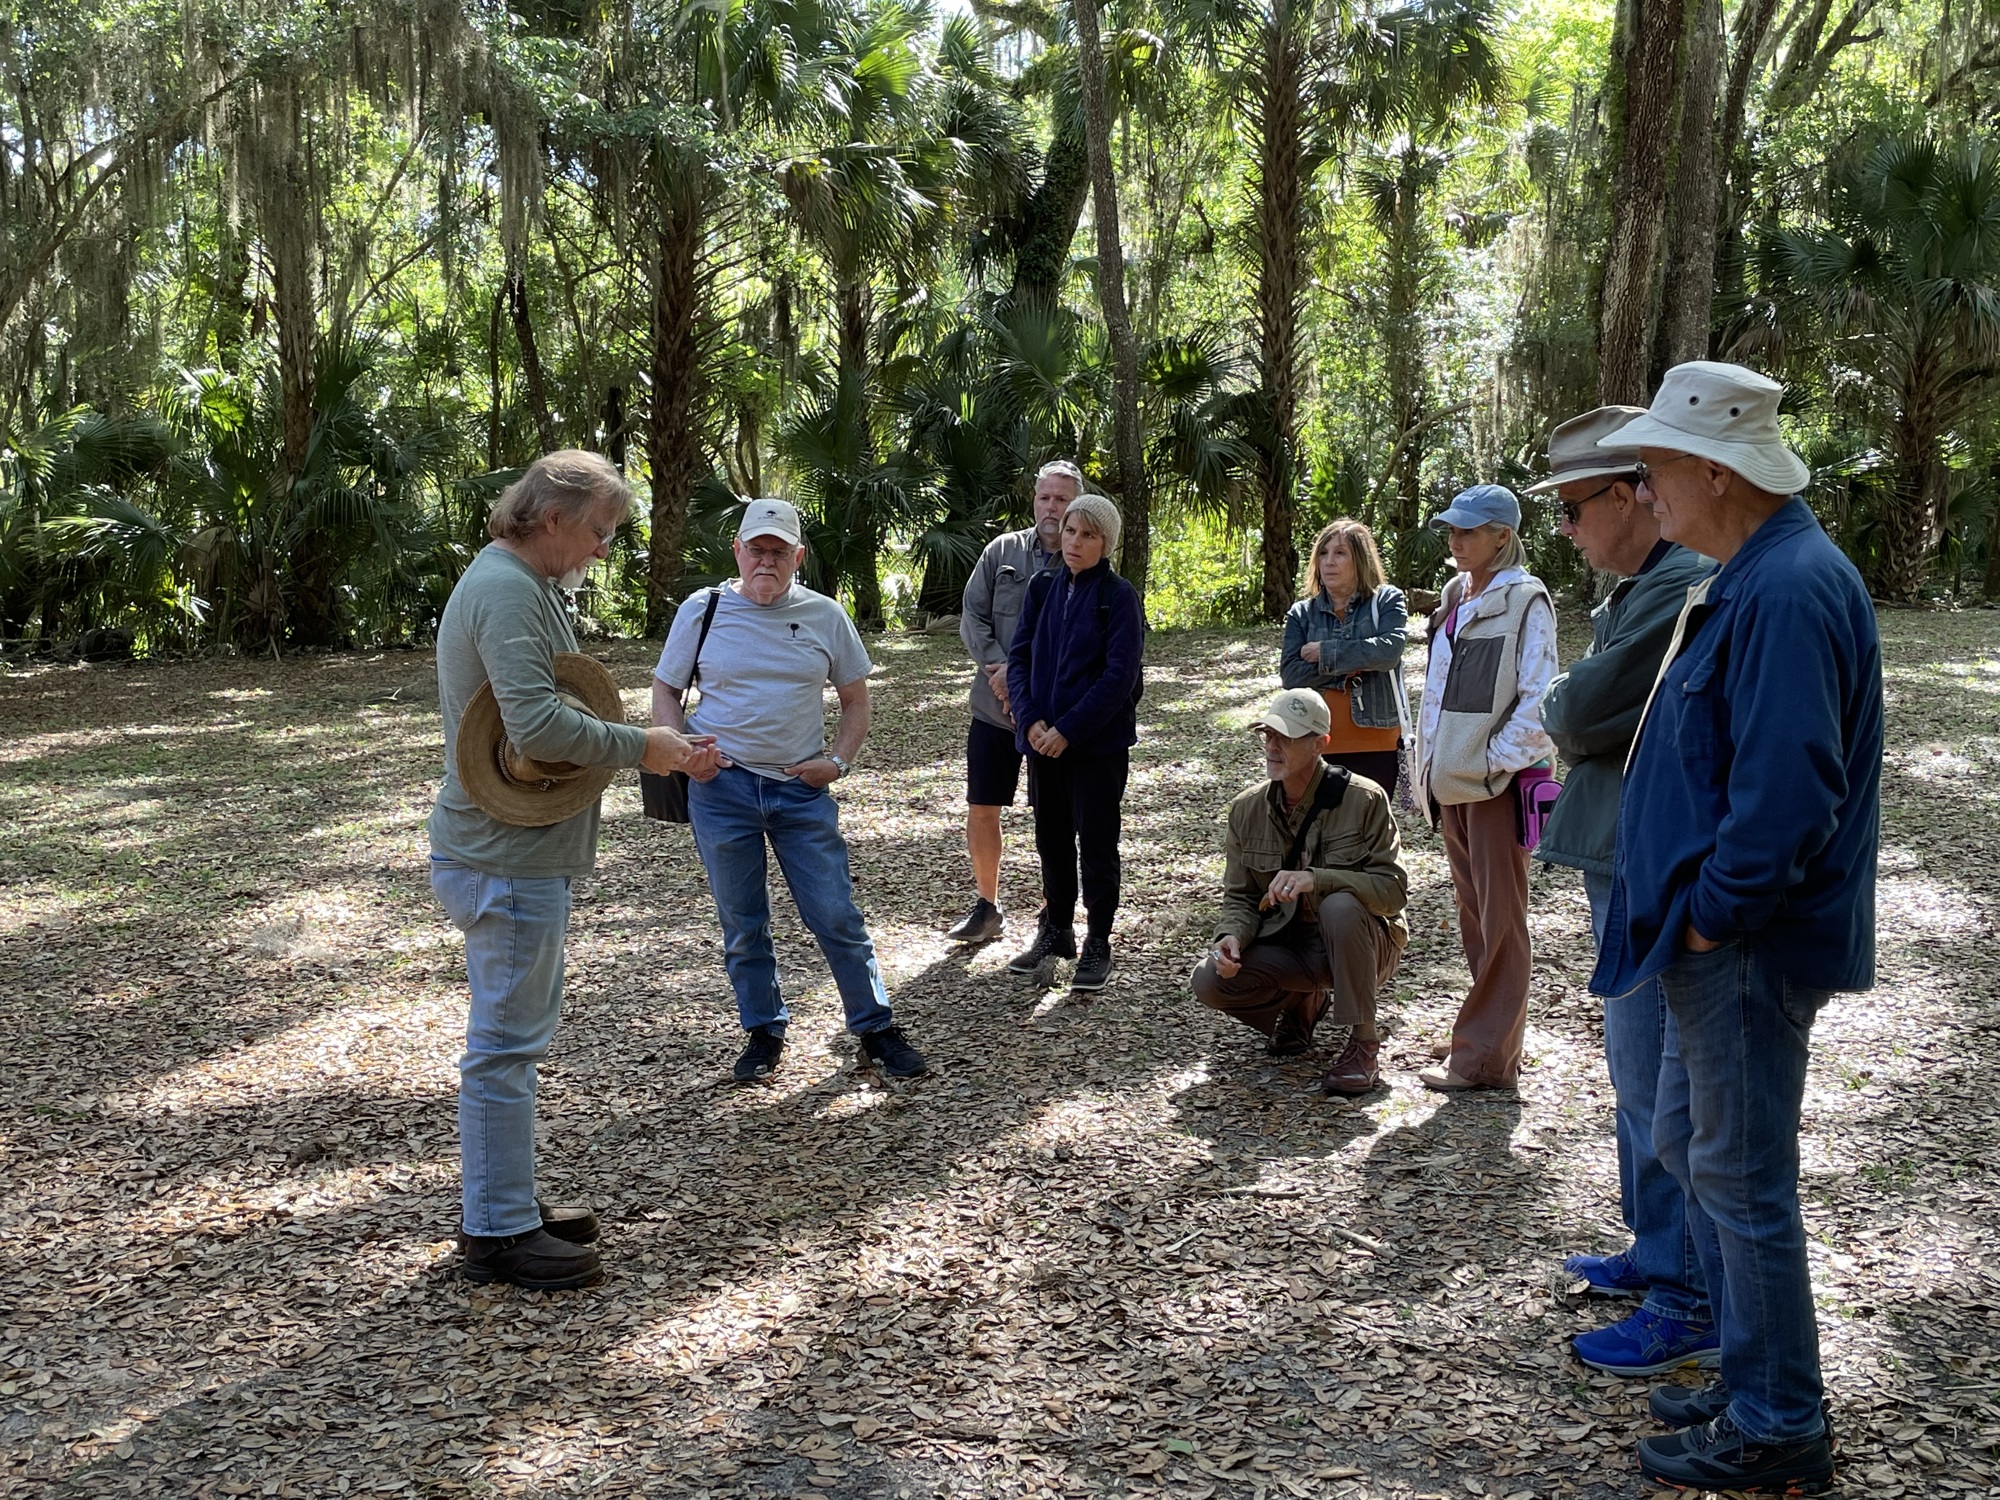 Dr. Don Spence, plant pathologist and board-certified master arborist, leads hikers on an educational walk. Courtesy photo